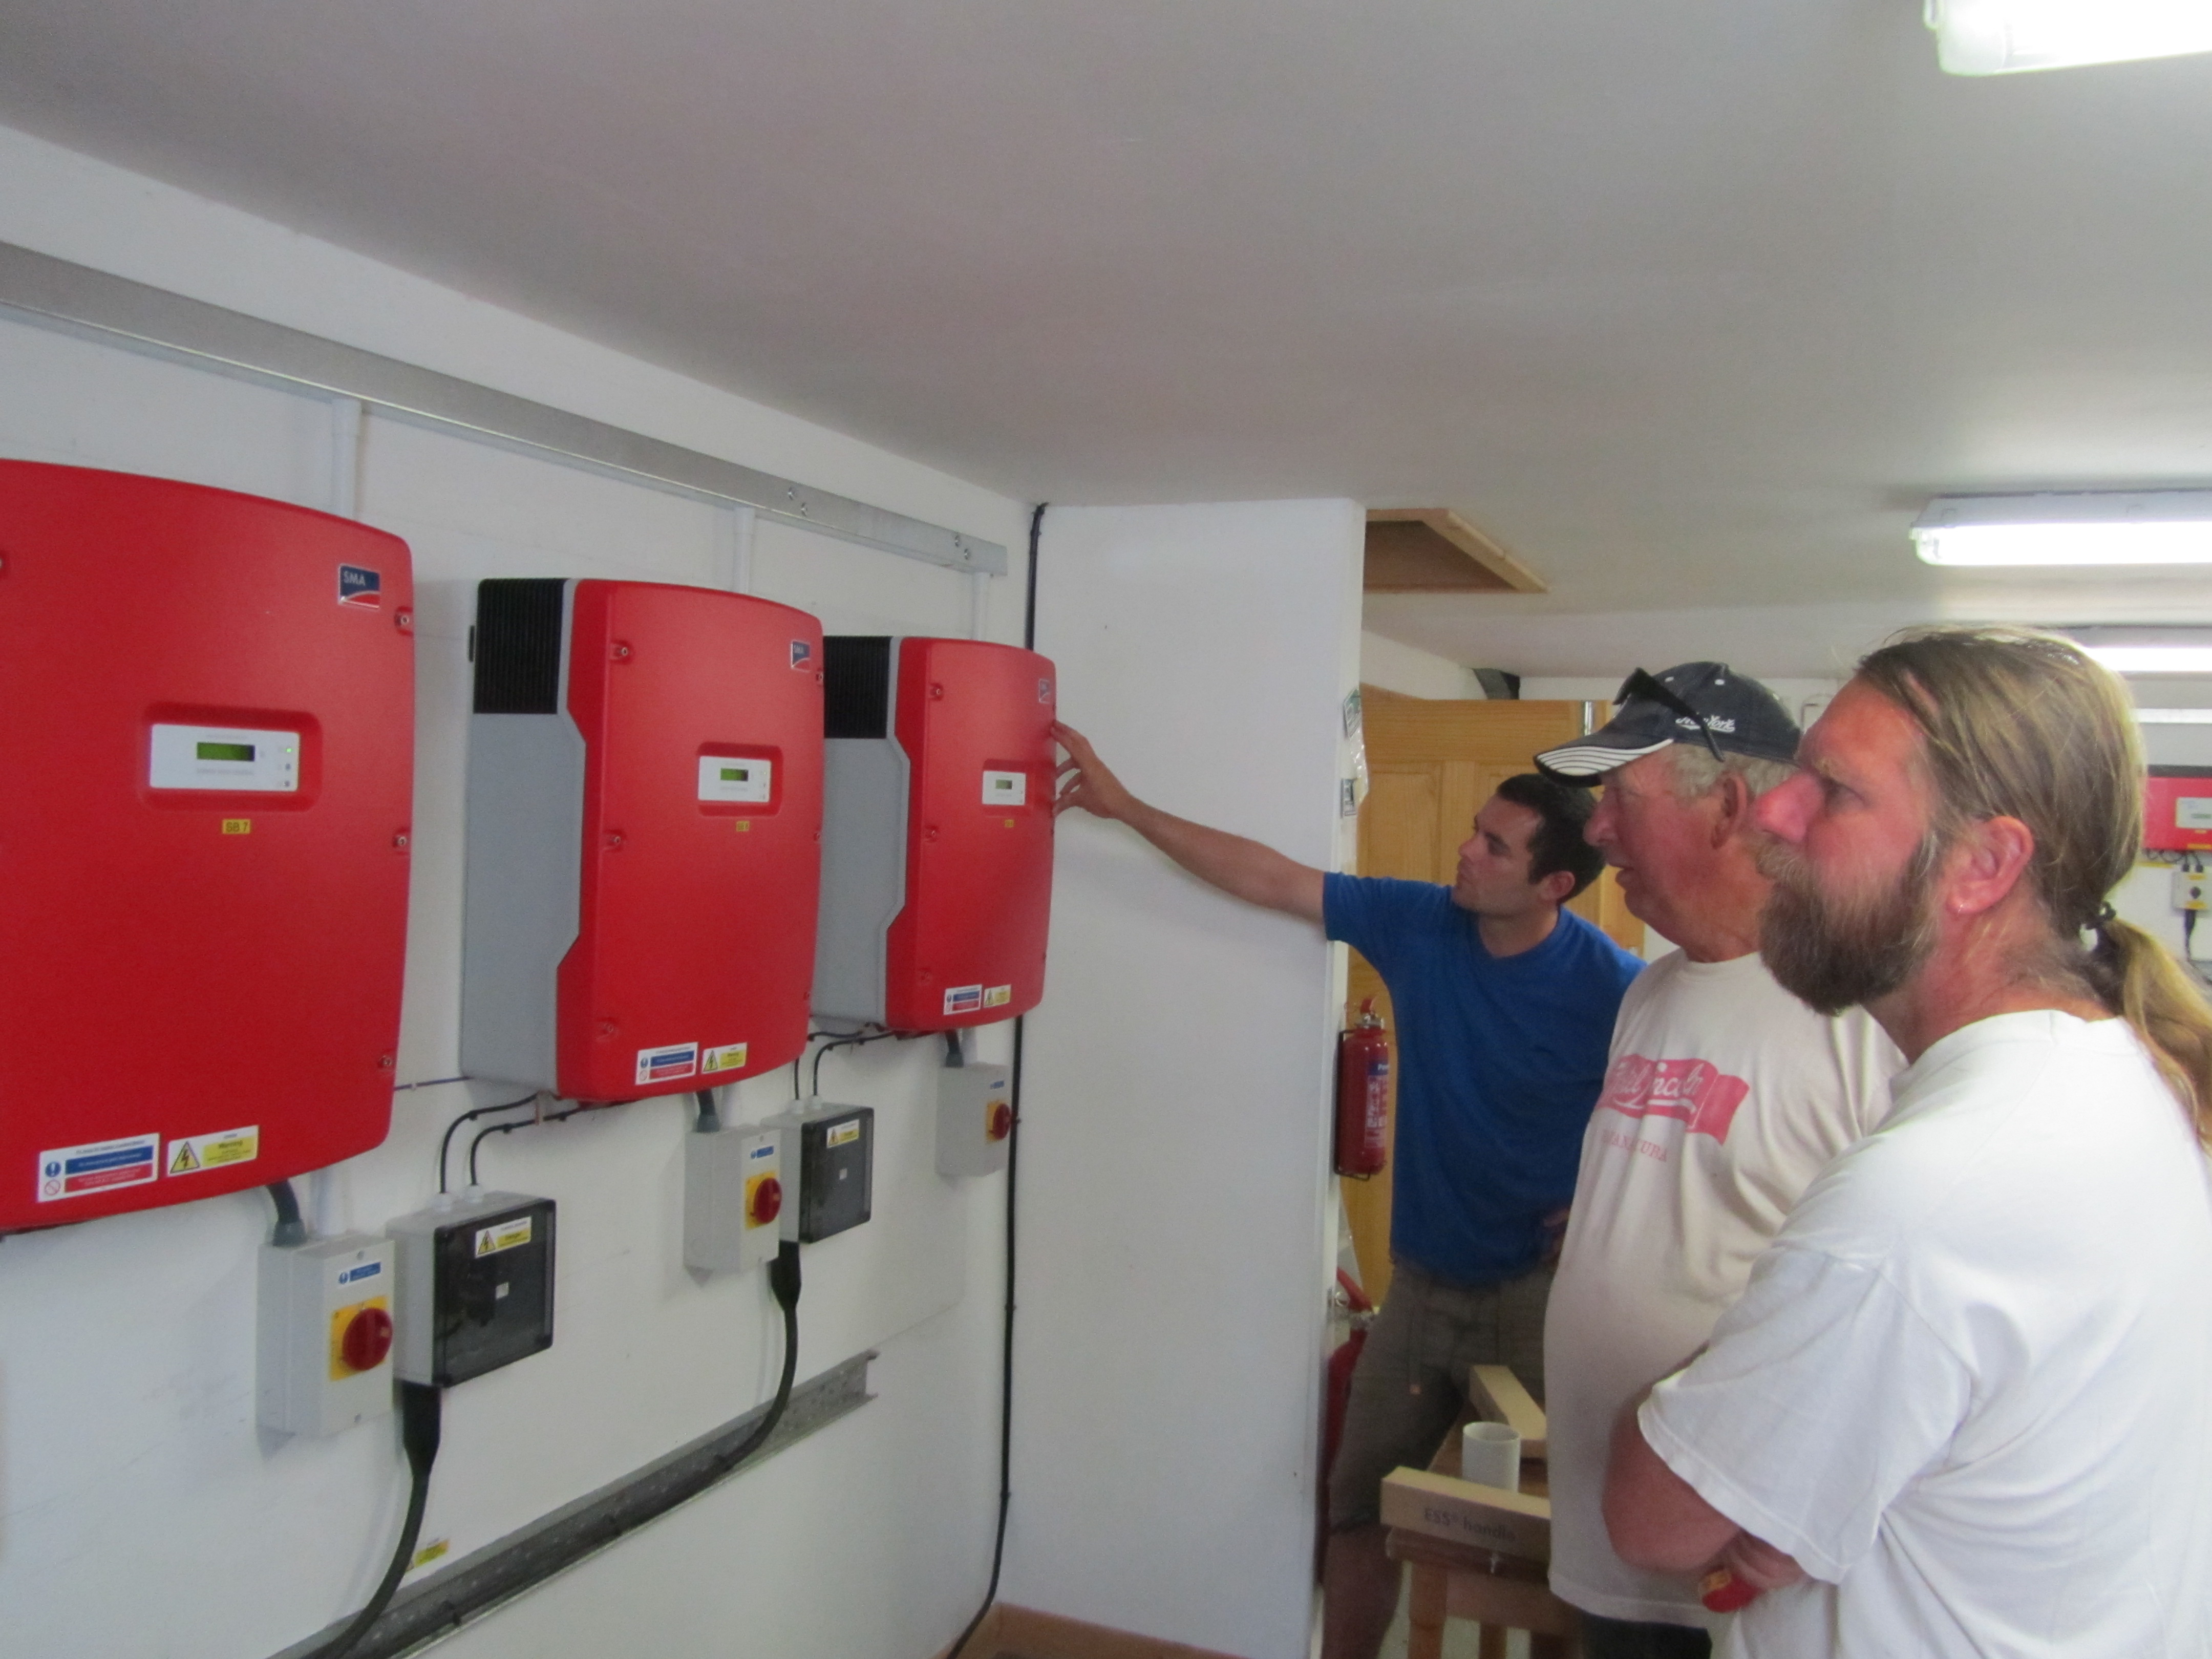 Checking inverters